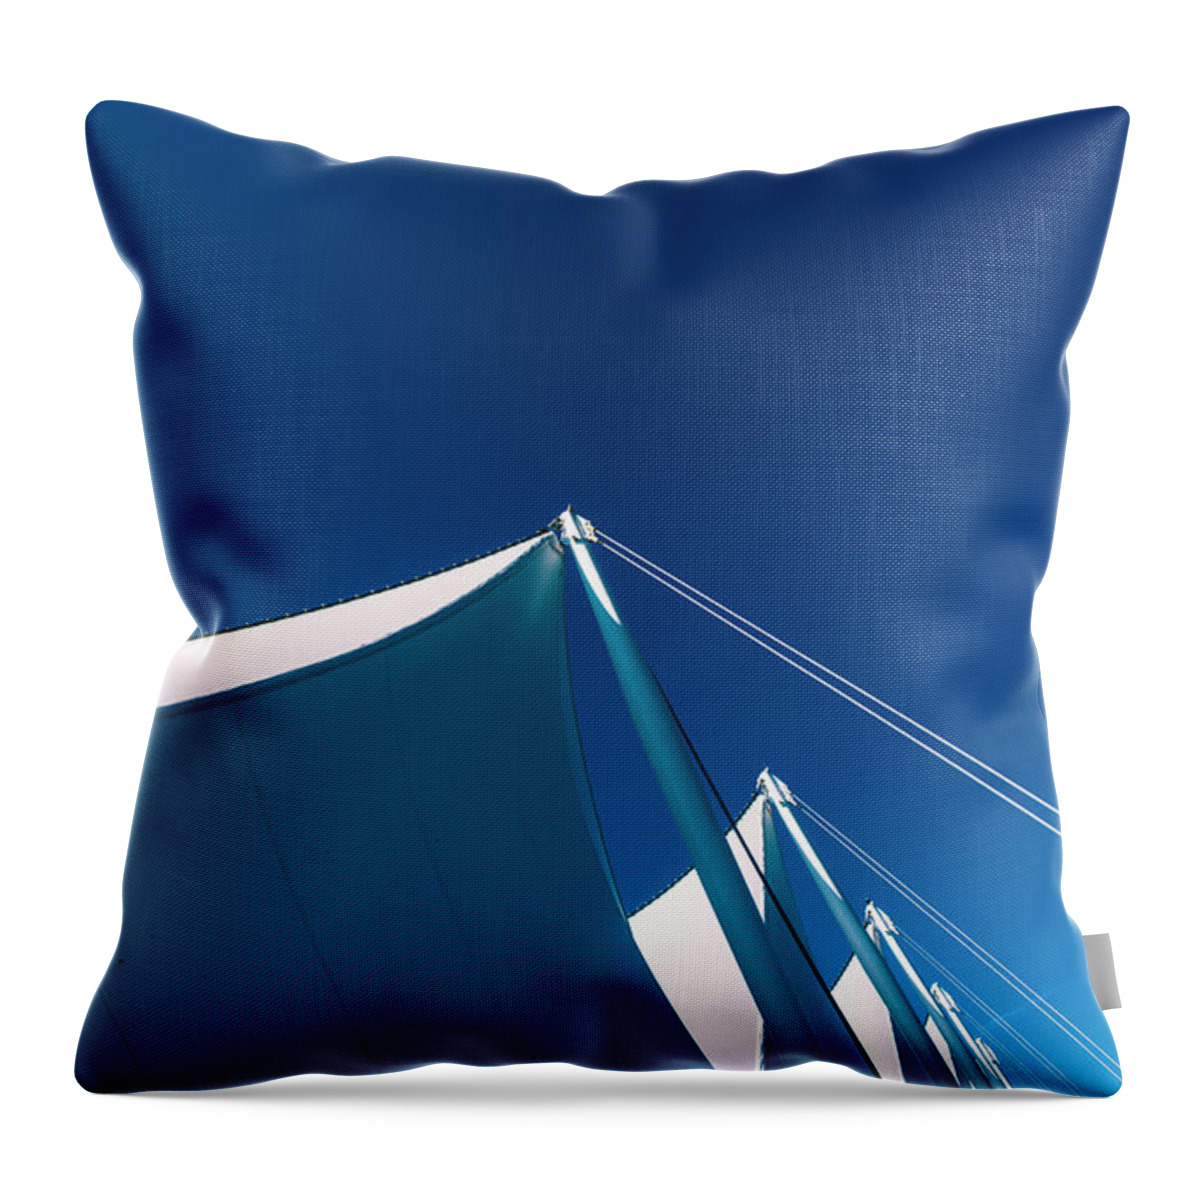 Port Of Vancouver Throw Pillow featuring the photograph 0172 Port of Vancouver Sails Waterfront by Amyn Nasser Neptune Gallery